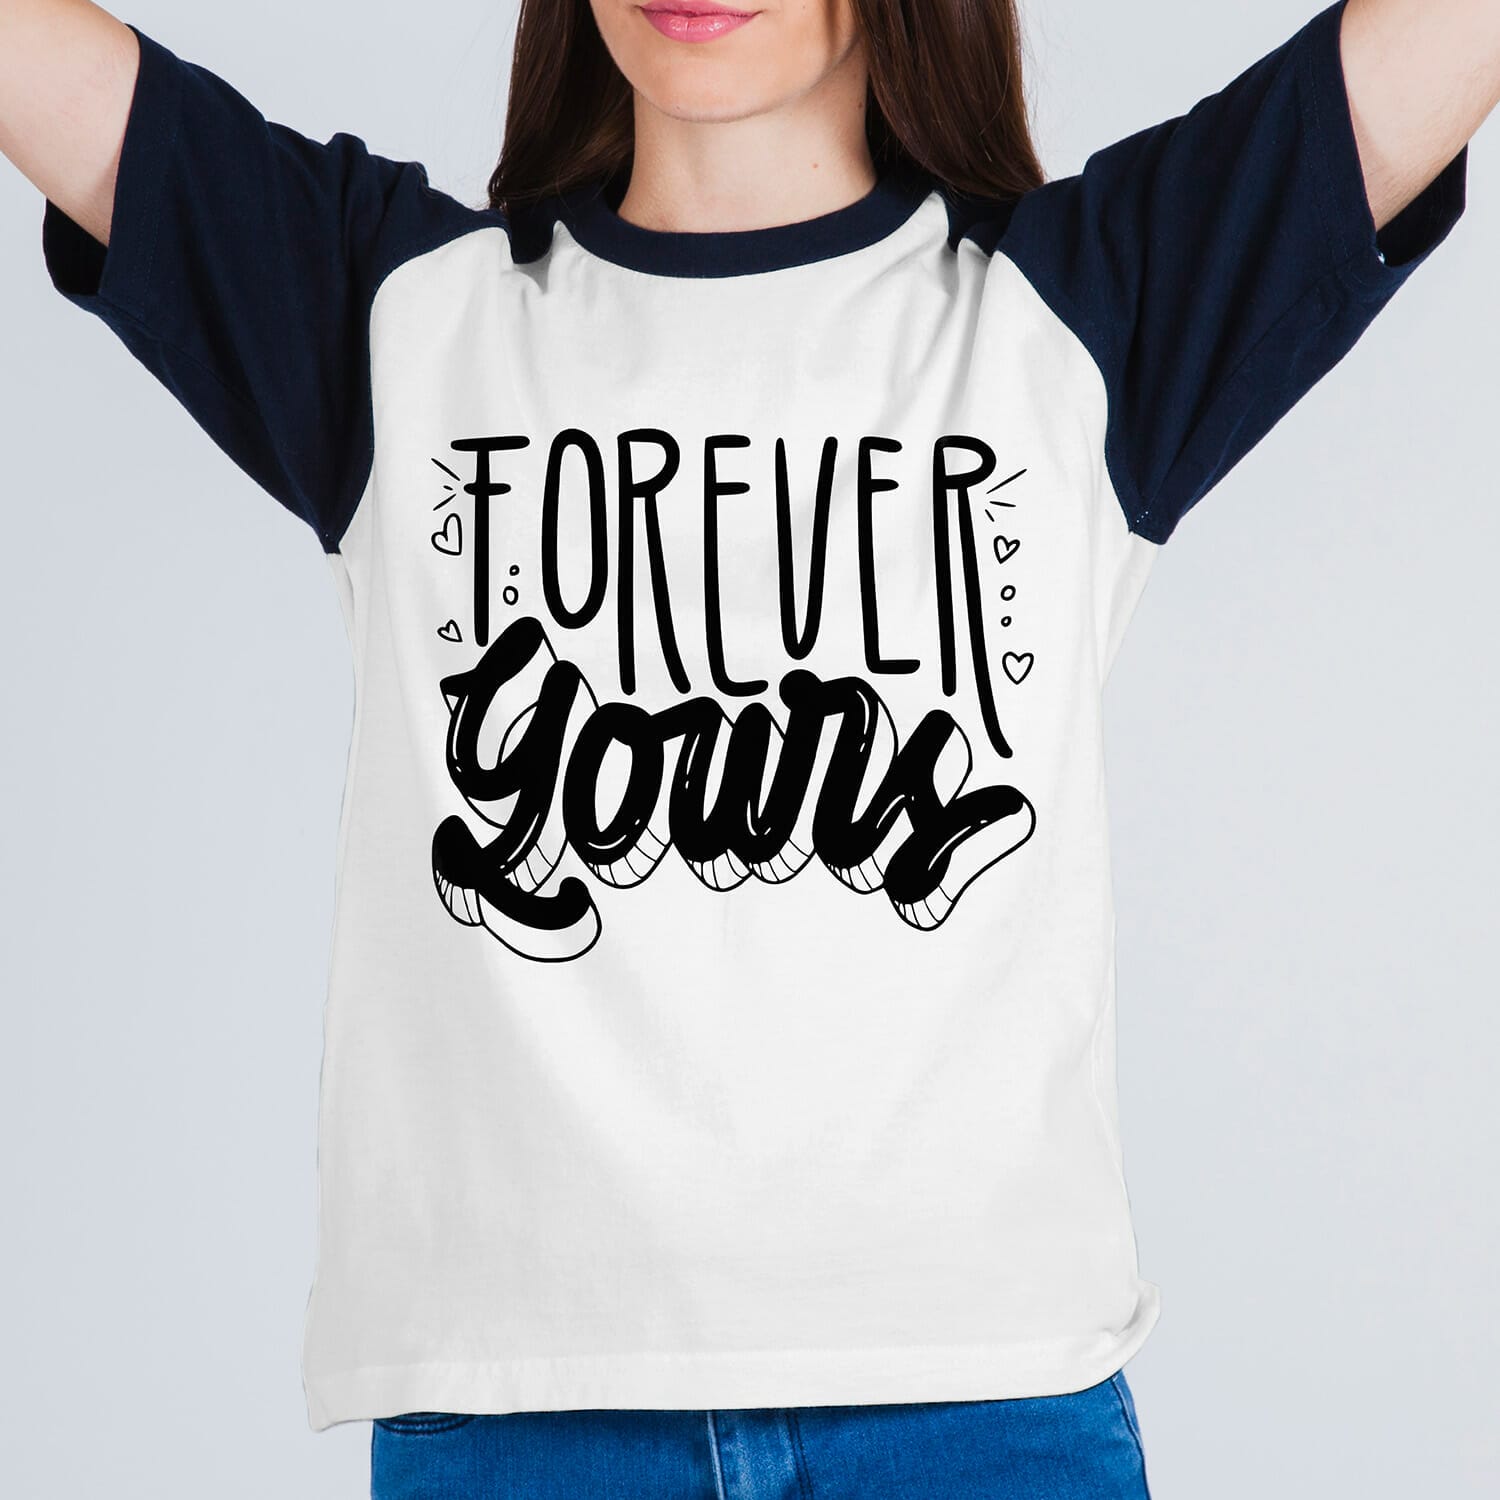 Forever yours T shirt design For Free